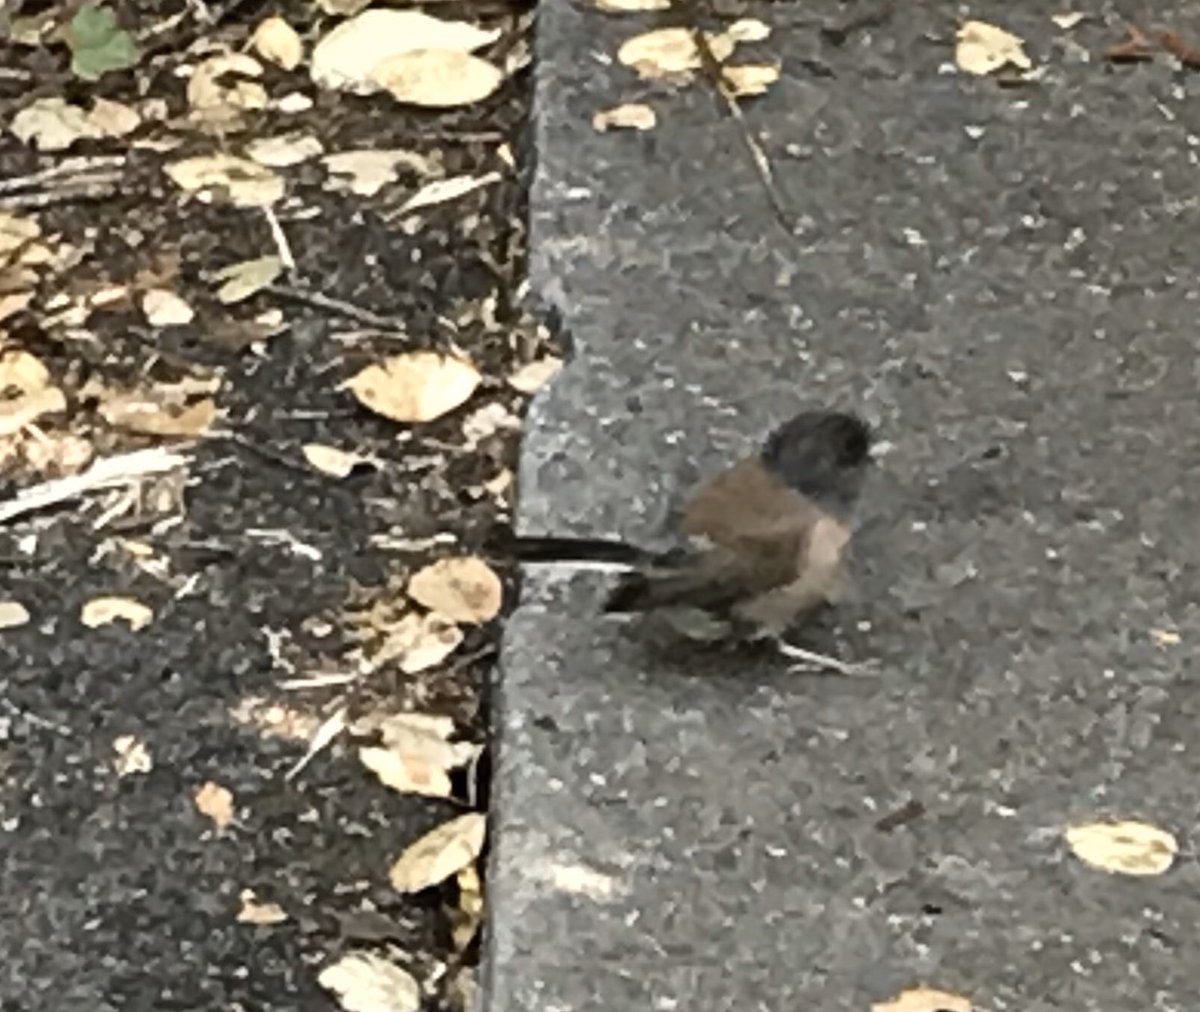 Hopping along with apparent disregard for my presence was a little Dark-eyed Junco (Junco hyemalis) in the beautiful brown-backed phenotype.  #berkeleyadventures 6/12